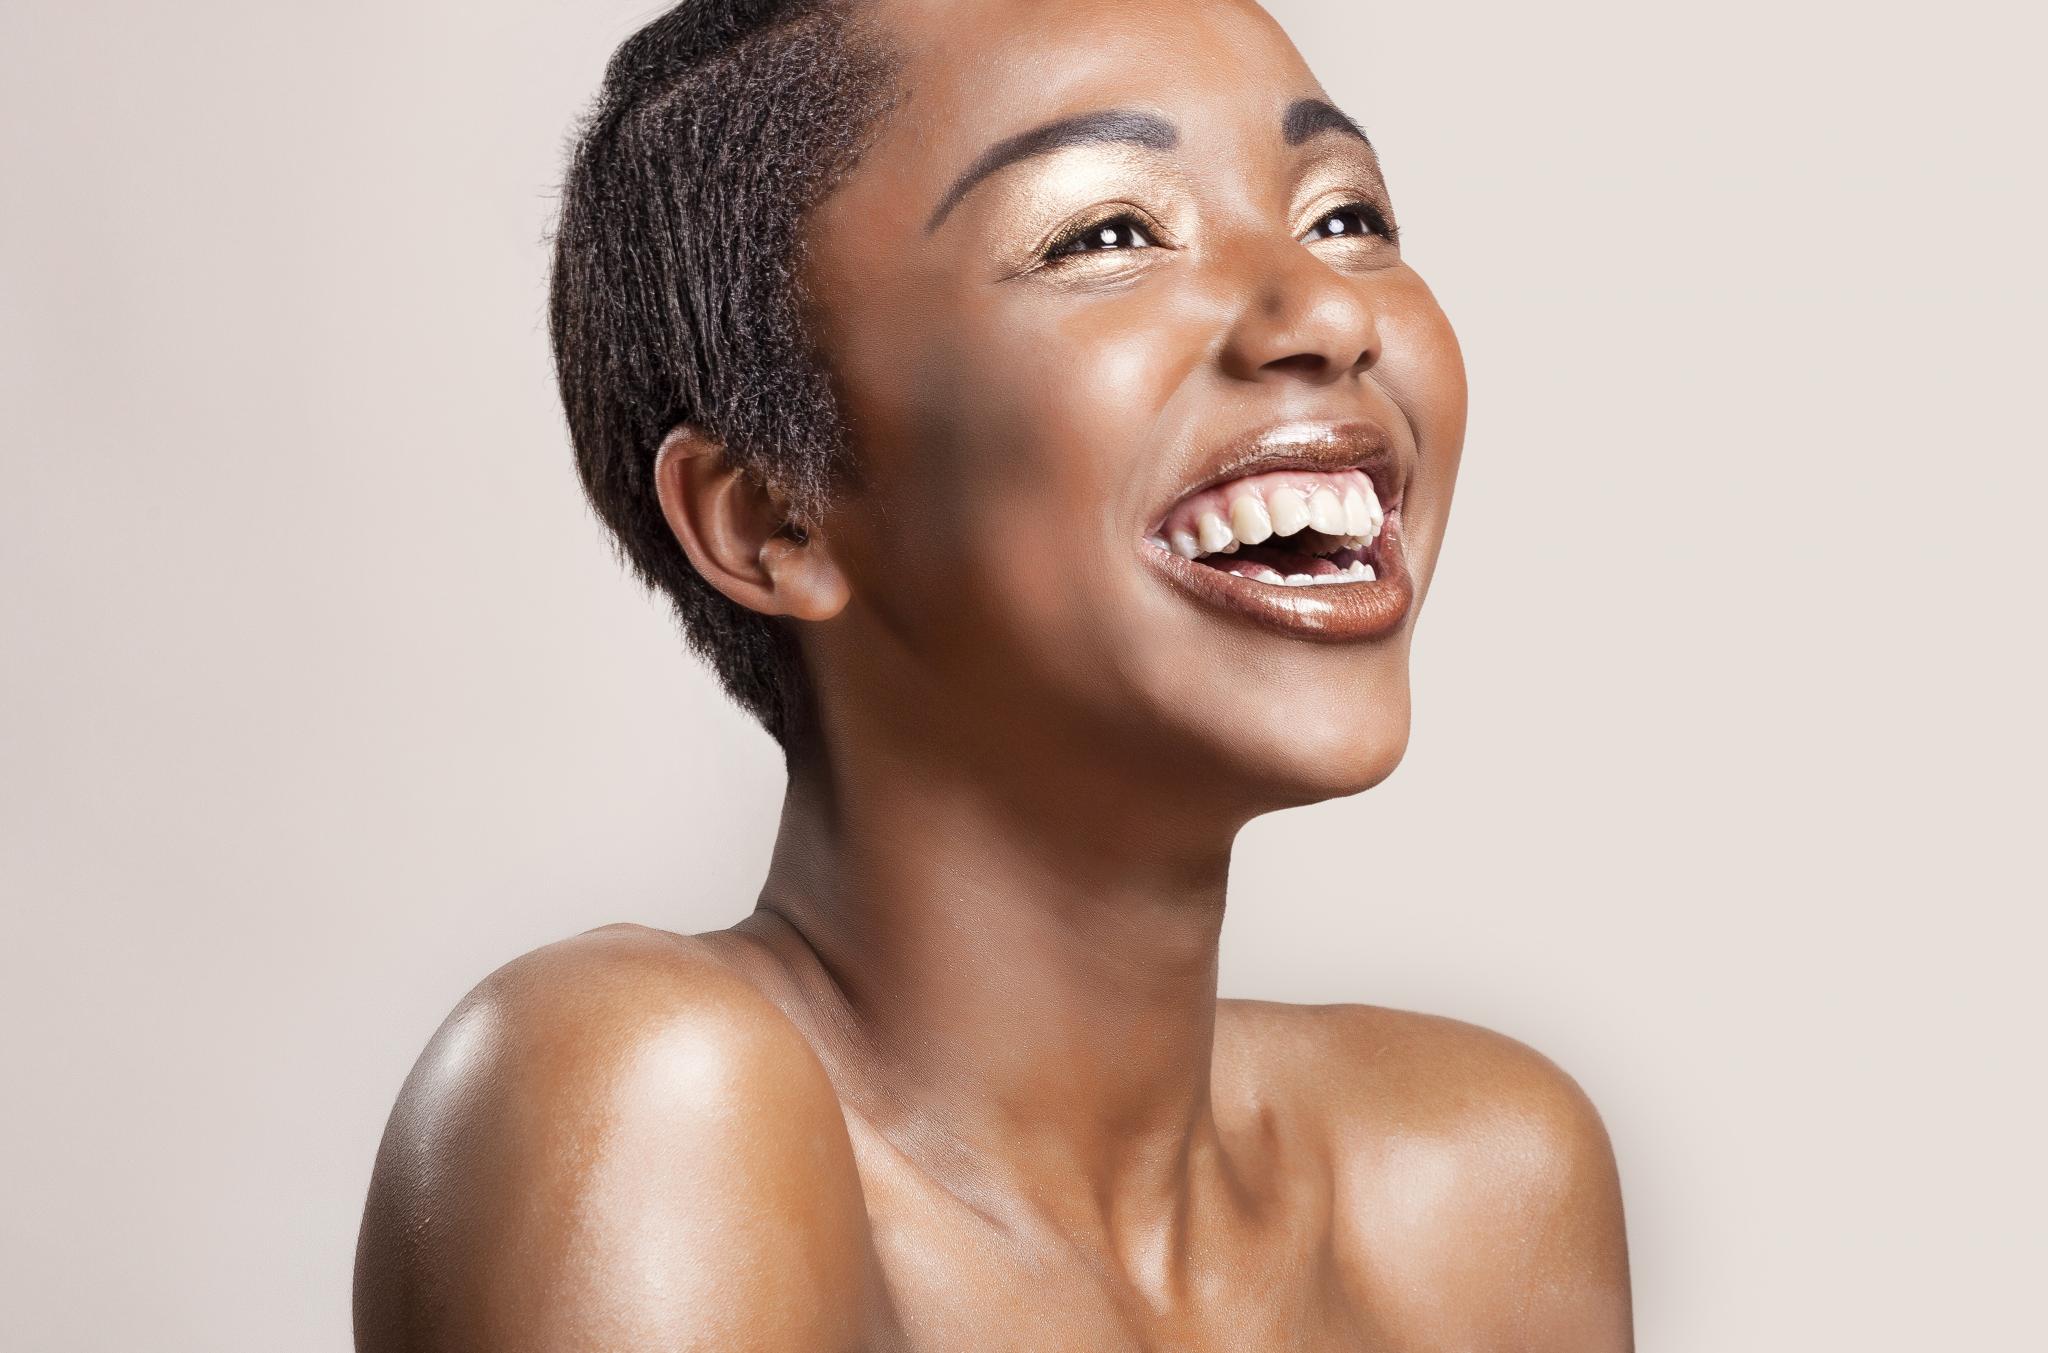 5 Ways To Care For Your Edges in The Winter